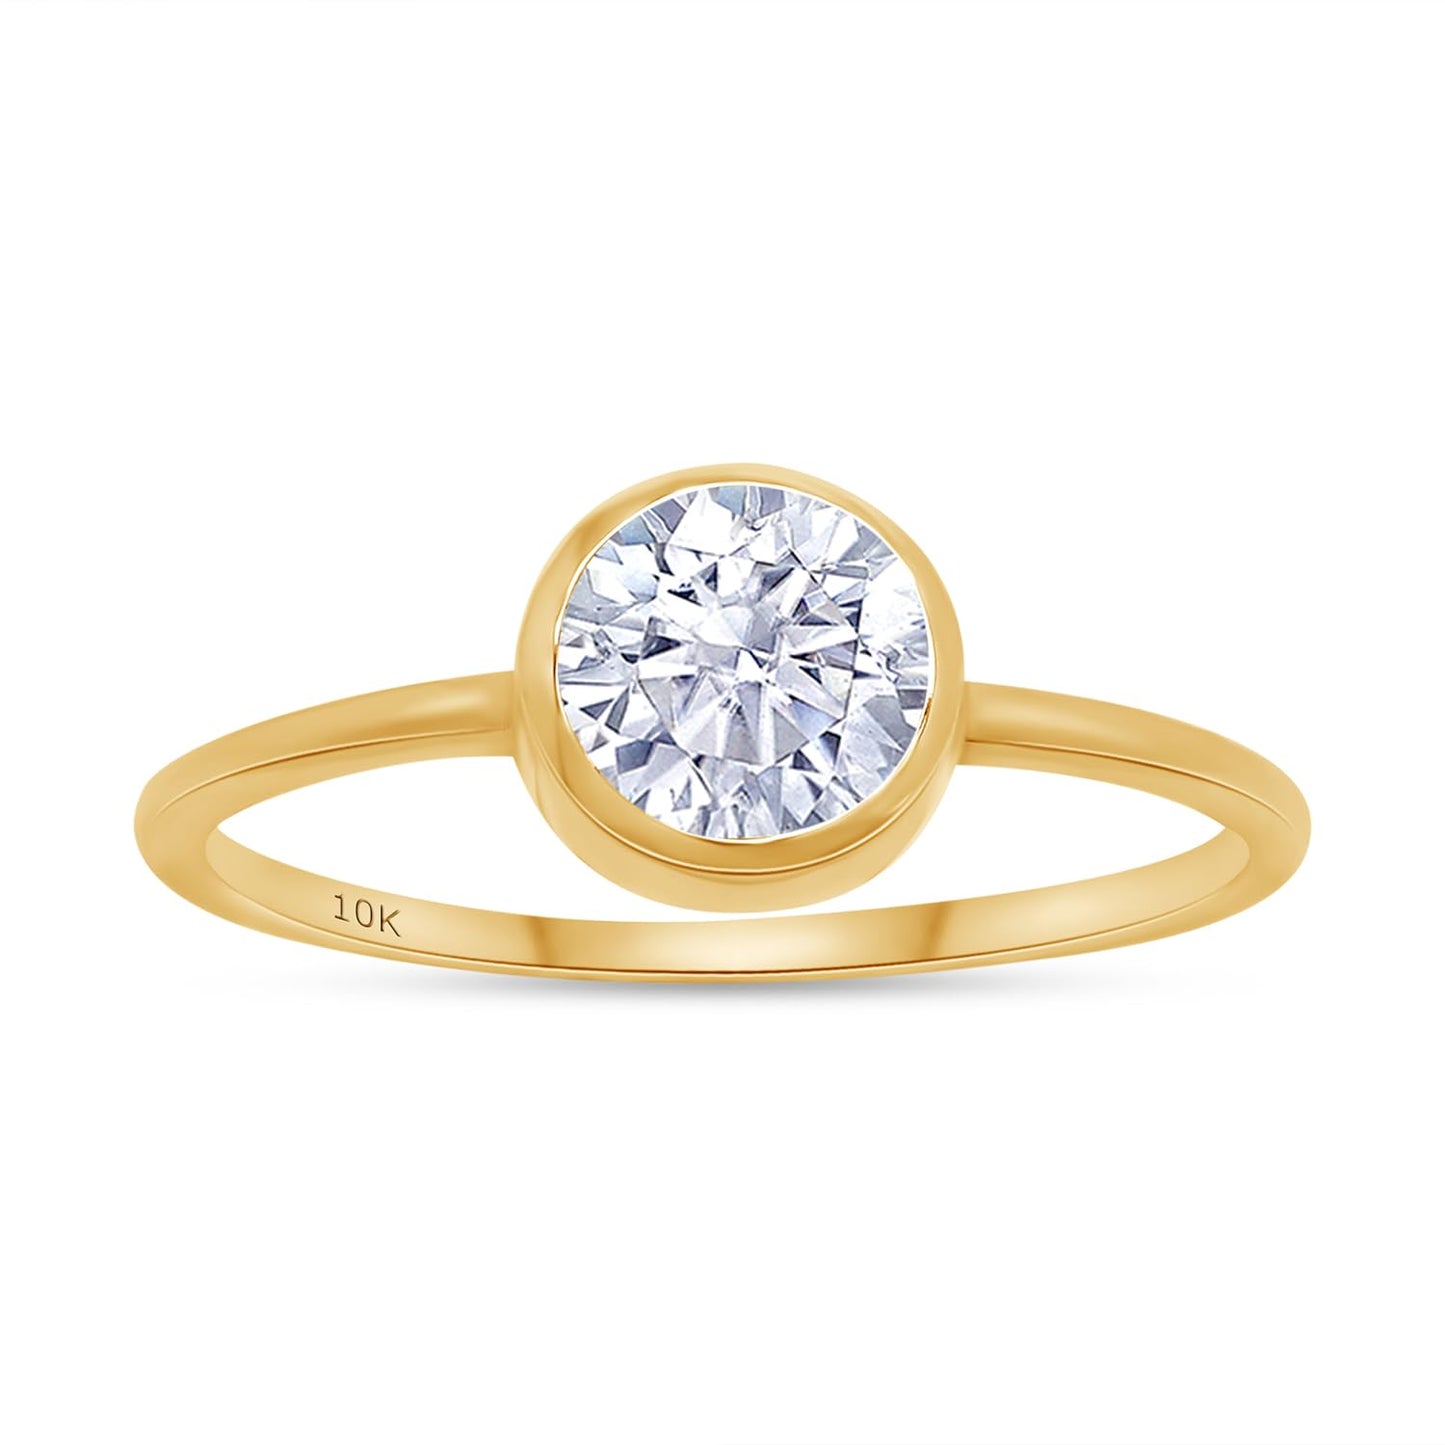 IGI Certified Lab Grown Diamond Engagement Ring (10K/14K Solid Gold) Round Shape Bezel Set Solitaire Promise Rings For Women Jewelry (0.66 Cttw)